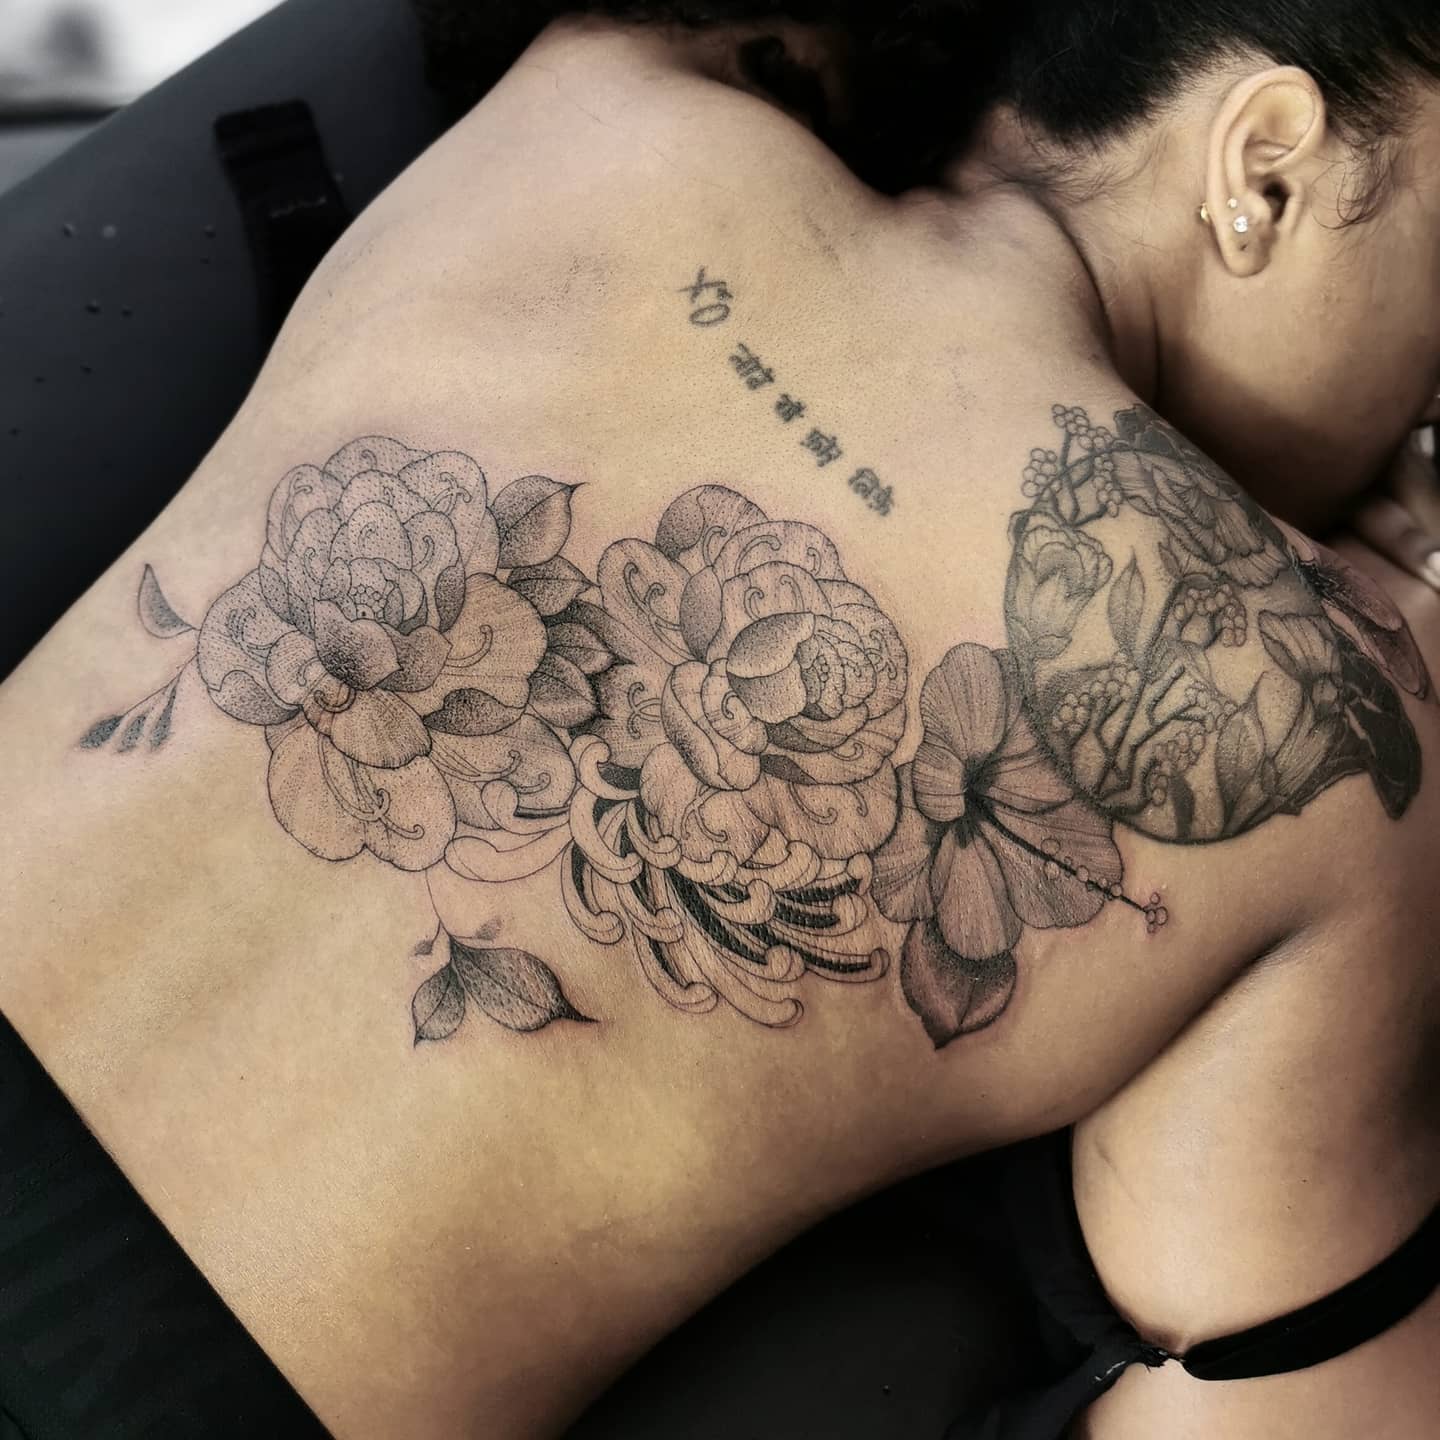 Im a tattoo artist sharing 7 mistakes people make when getting fineline  tattoos